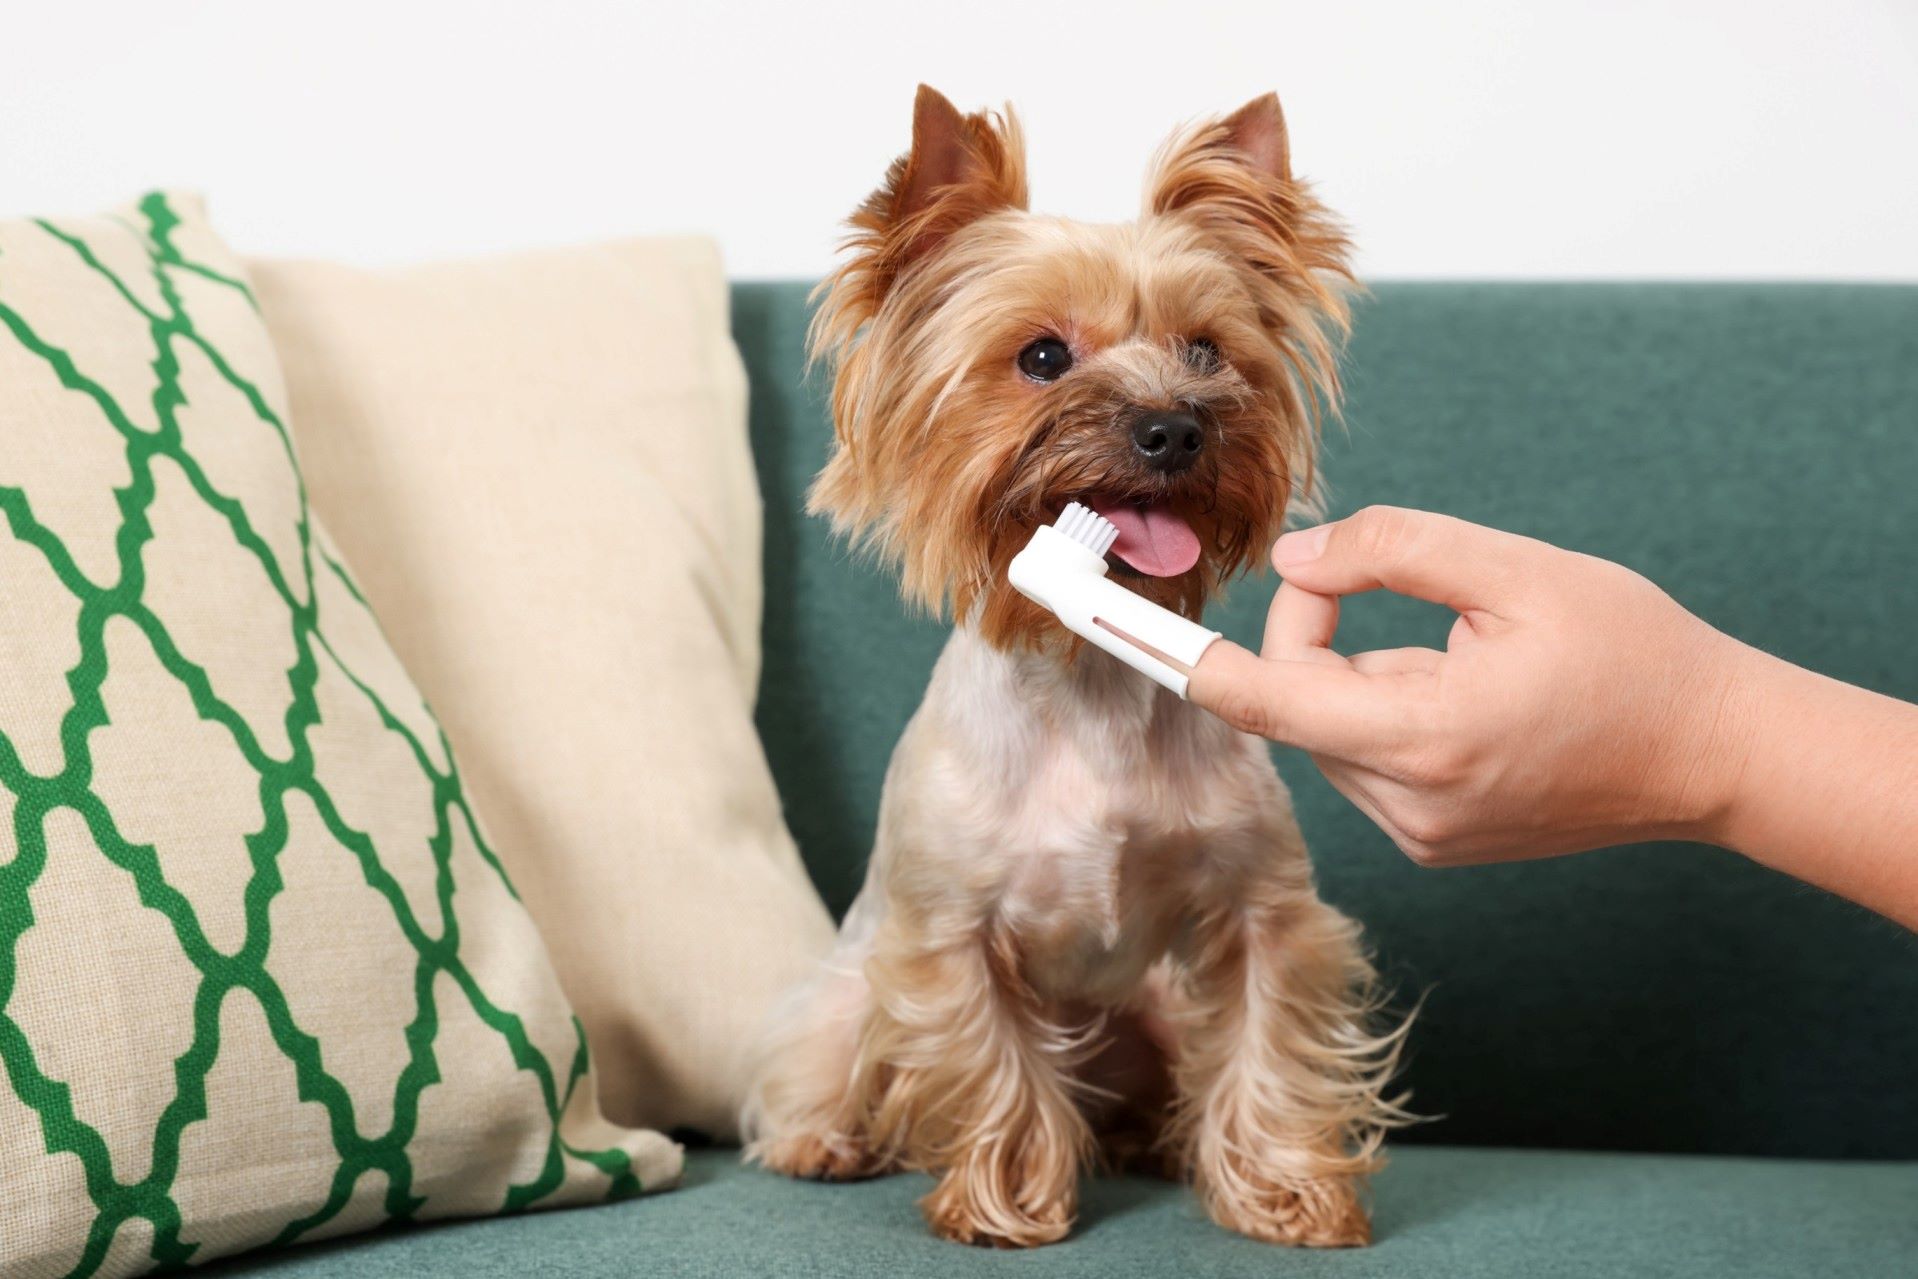 A man brushing a small dog's teeth with a special toothbrush